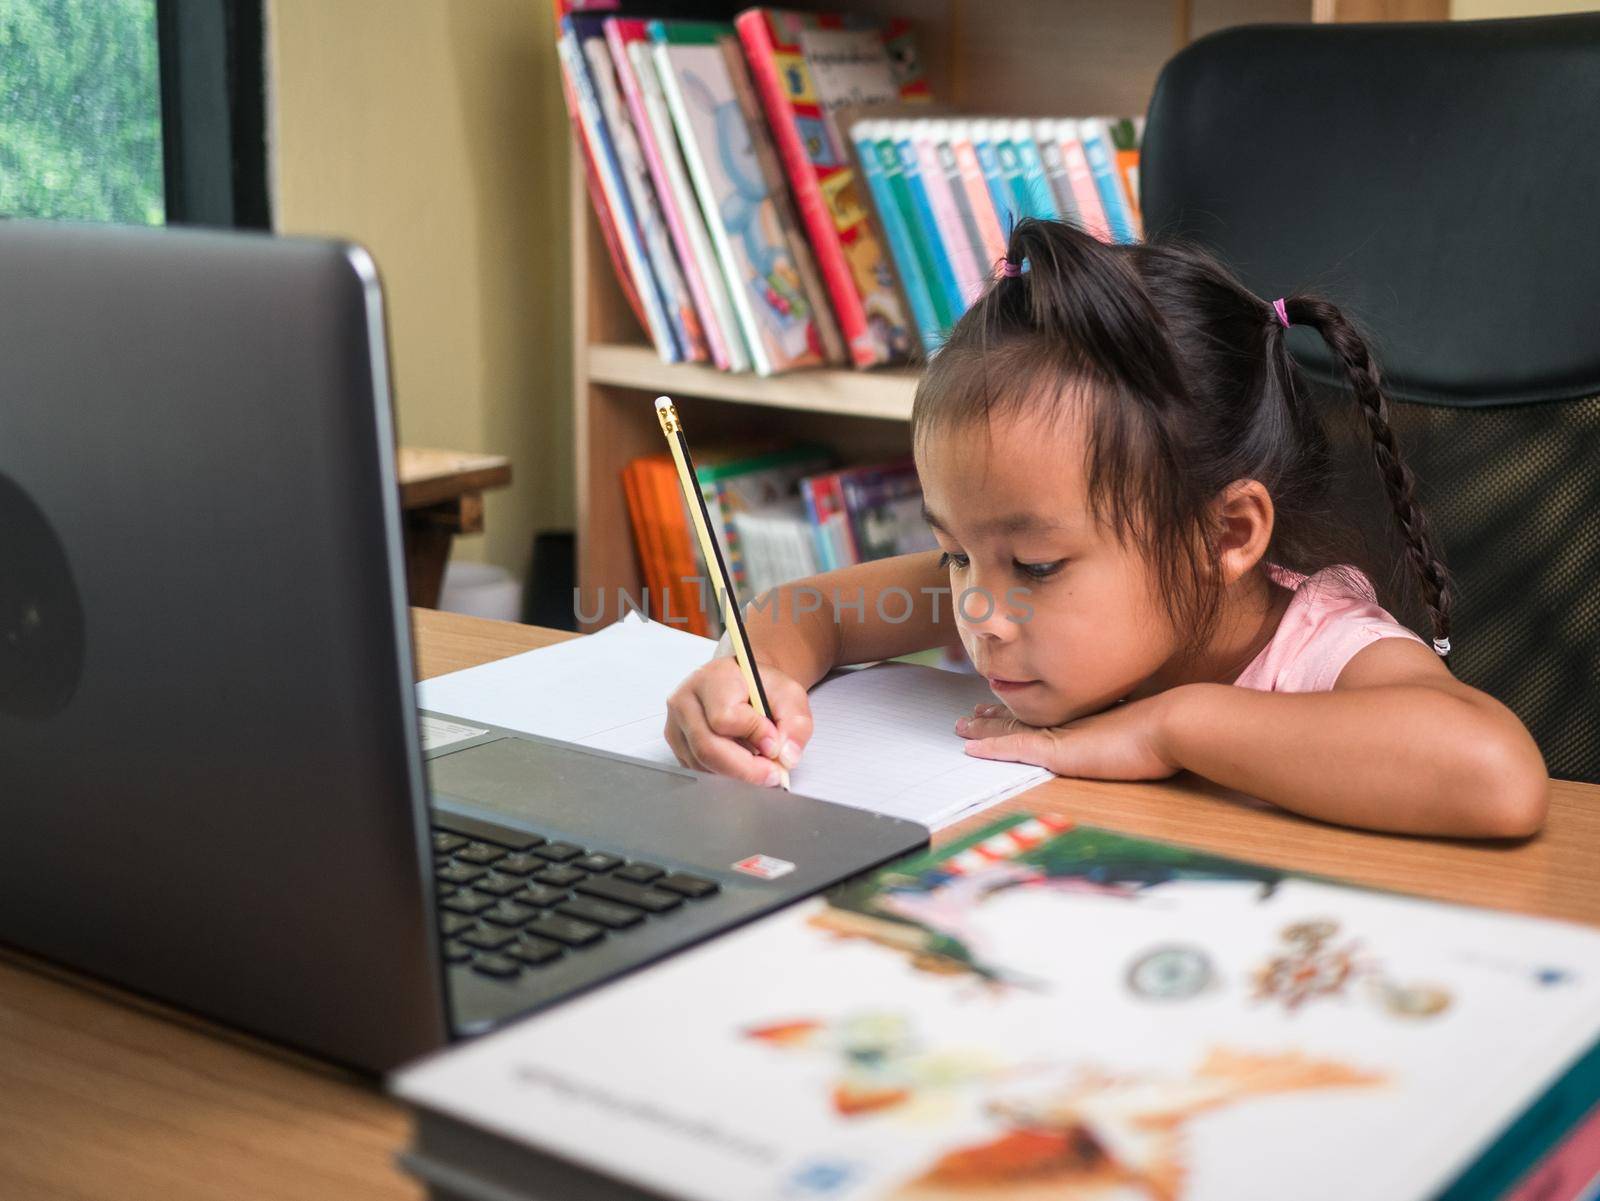 Cute little schoolgirl studying homework math during her online lesson at home, social distancing during the coronavirus outbreak. Concept of online education or home schooler. by TEERASAK